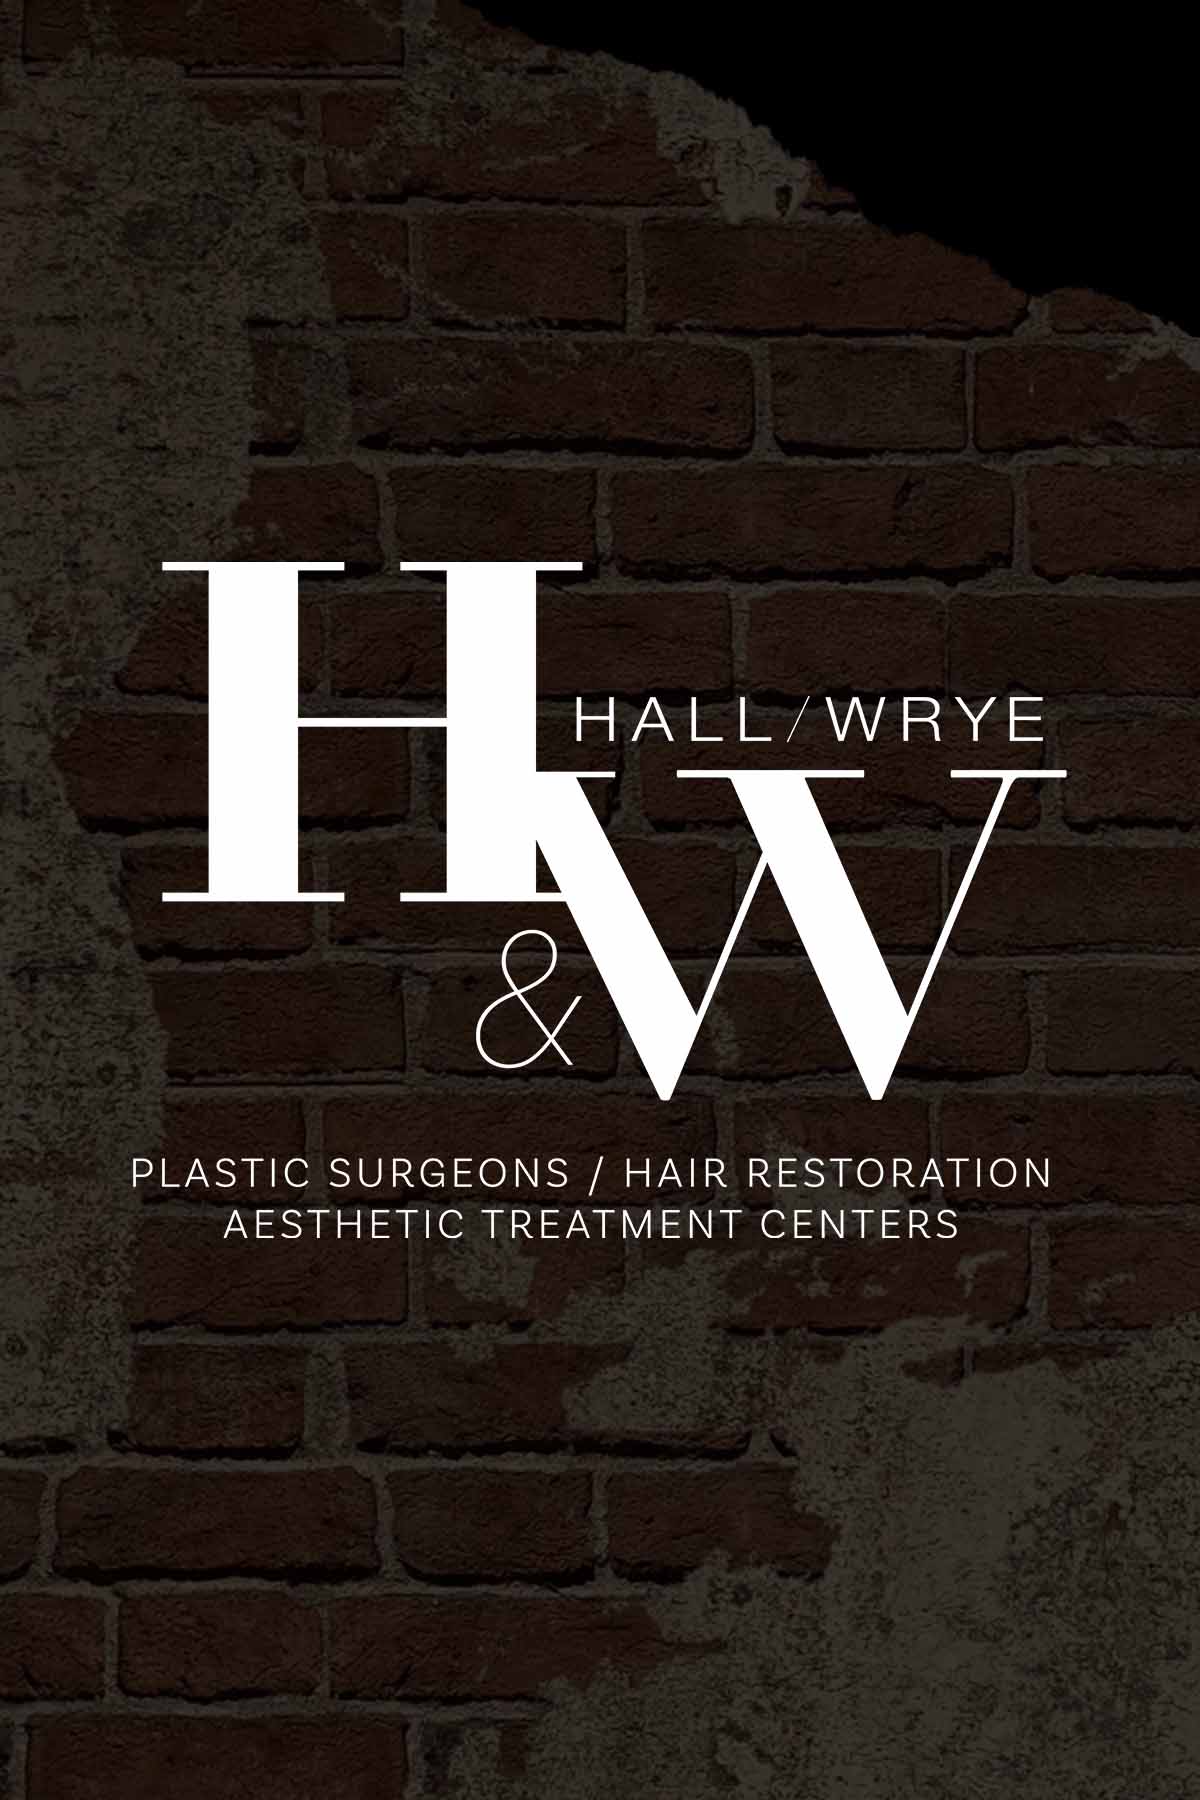 Hall and Wrye Plastic Surgeons in Reno NV – Breast Lifts – Facelifts – Cosmetic Surgery and Aesthetic Treatment Services